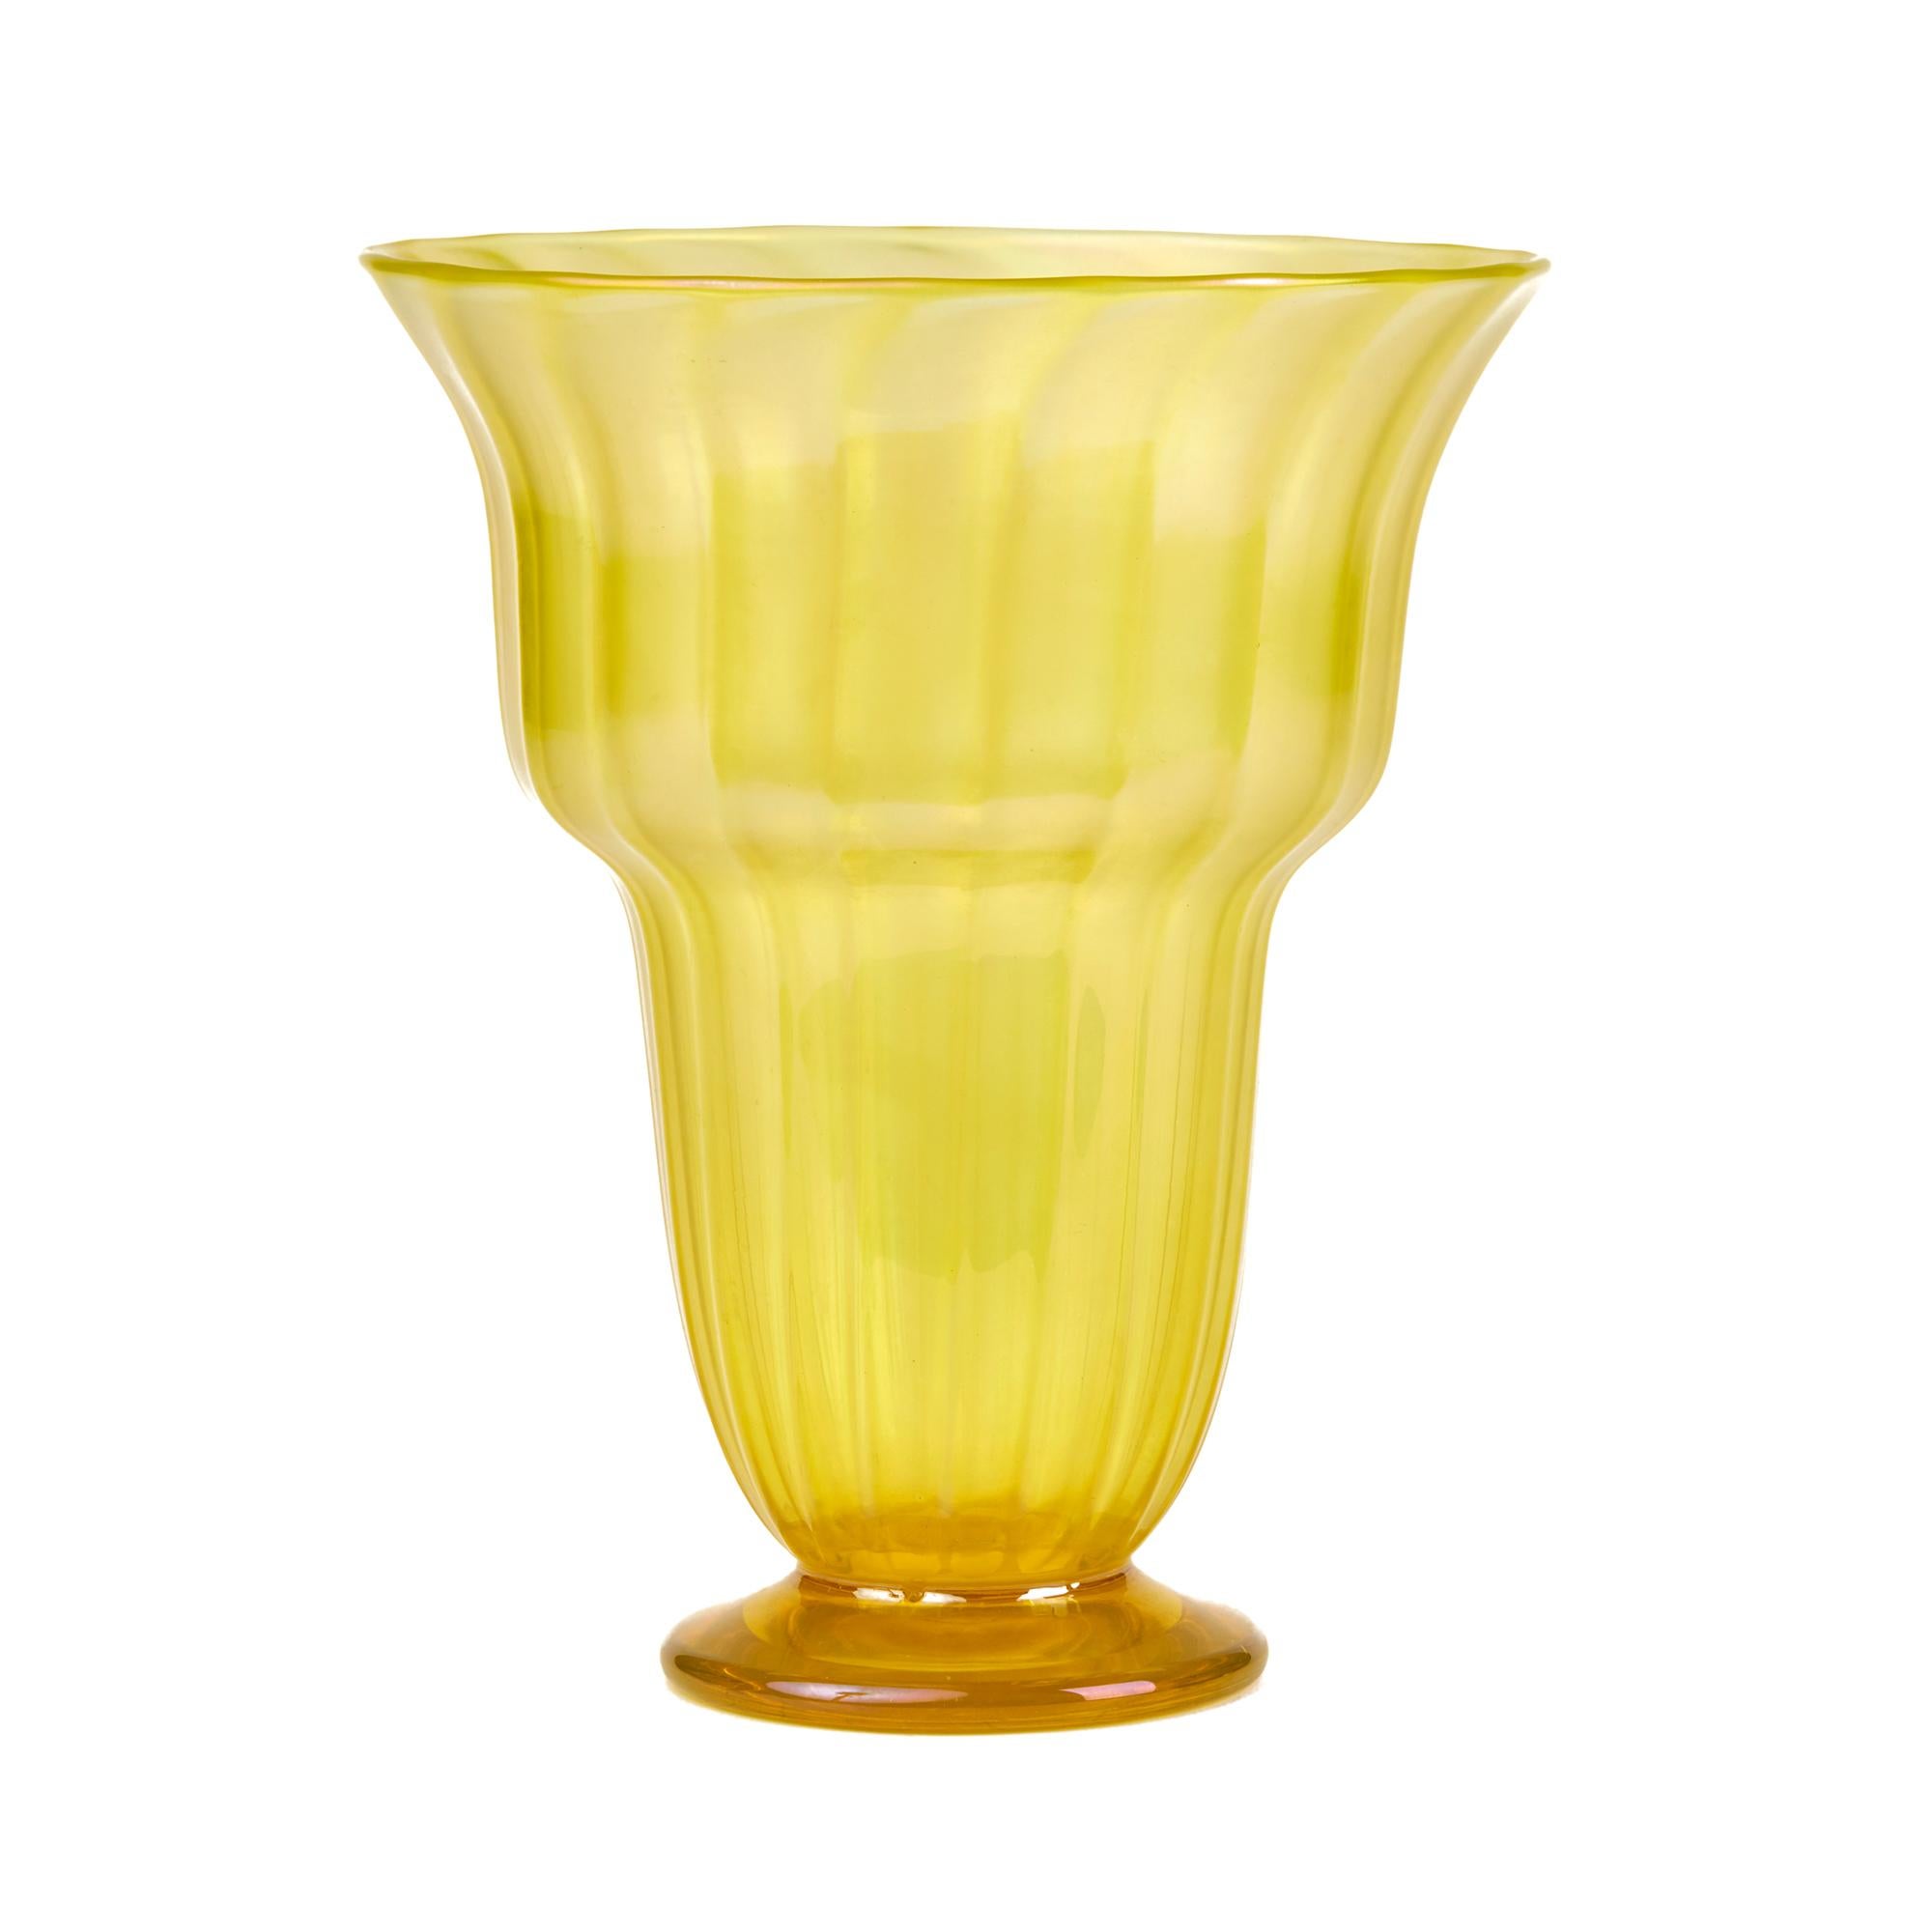 A rare and large Art Deco John Walsh Walsh iridescent Sunbeam uranium yellow art glass vase standing on a narrow rounded glass foot with an opening bud shaped body with vertical ribbing. The vase has a wonderful yellow iridescent finish and has a